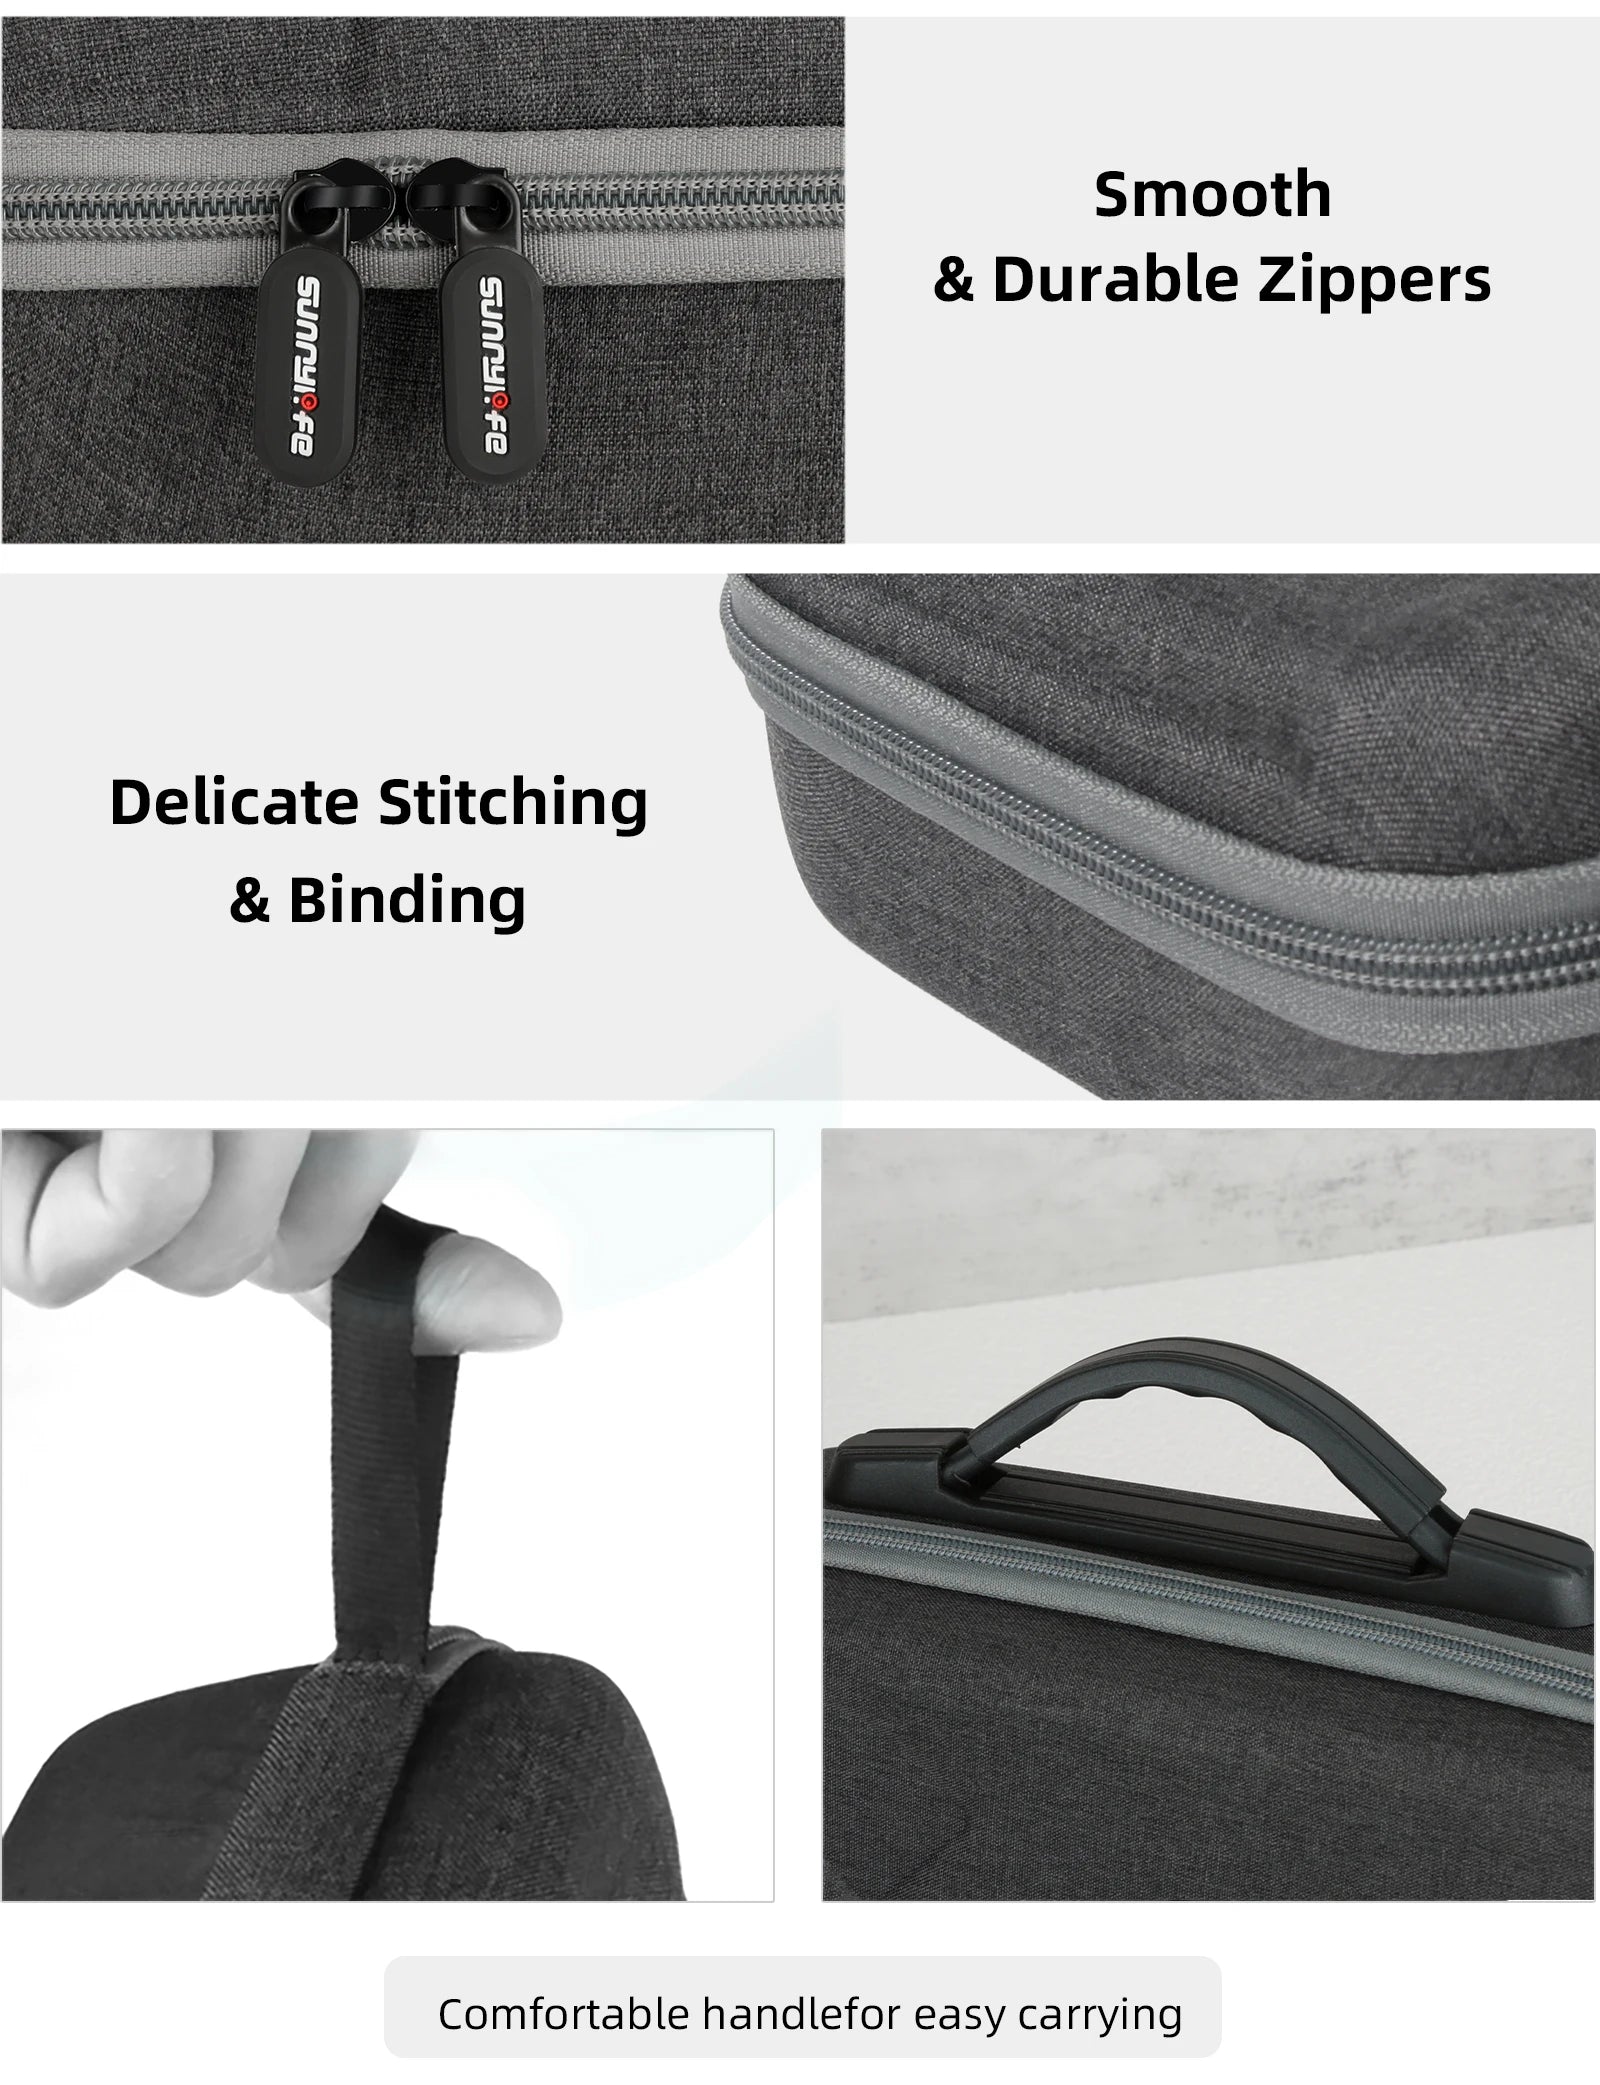 Portable Carrying Case For DJI Mini 4 Pro, Smooth & Durable Zippers 1 1 Delicate Stitching & Binding